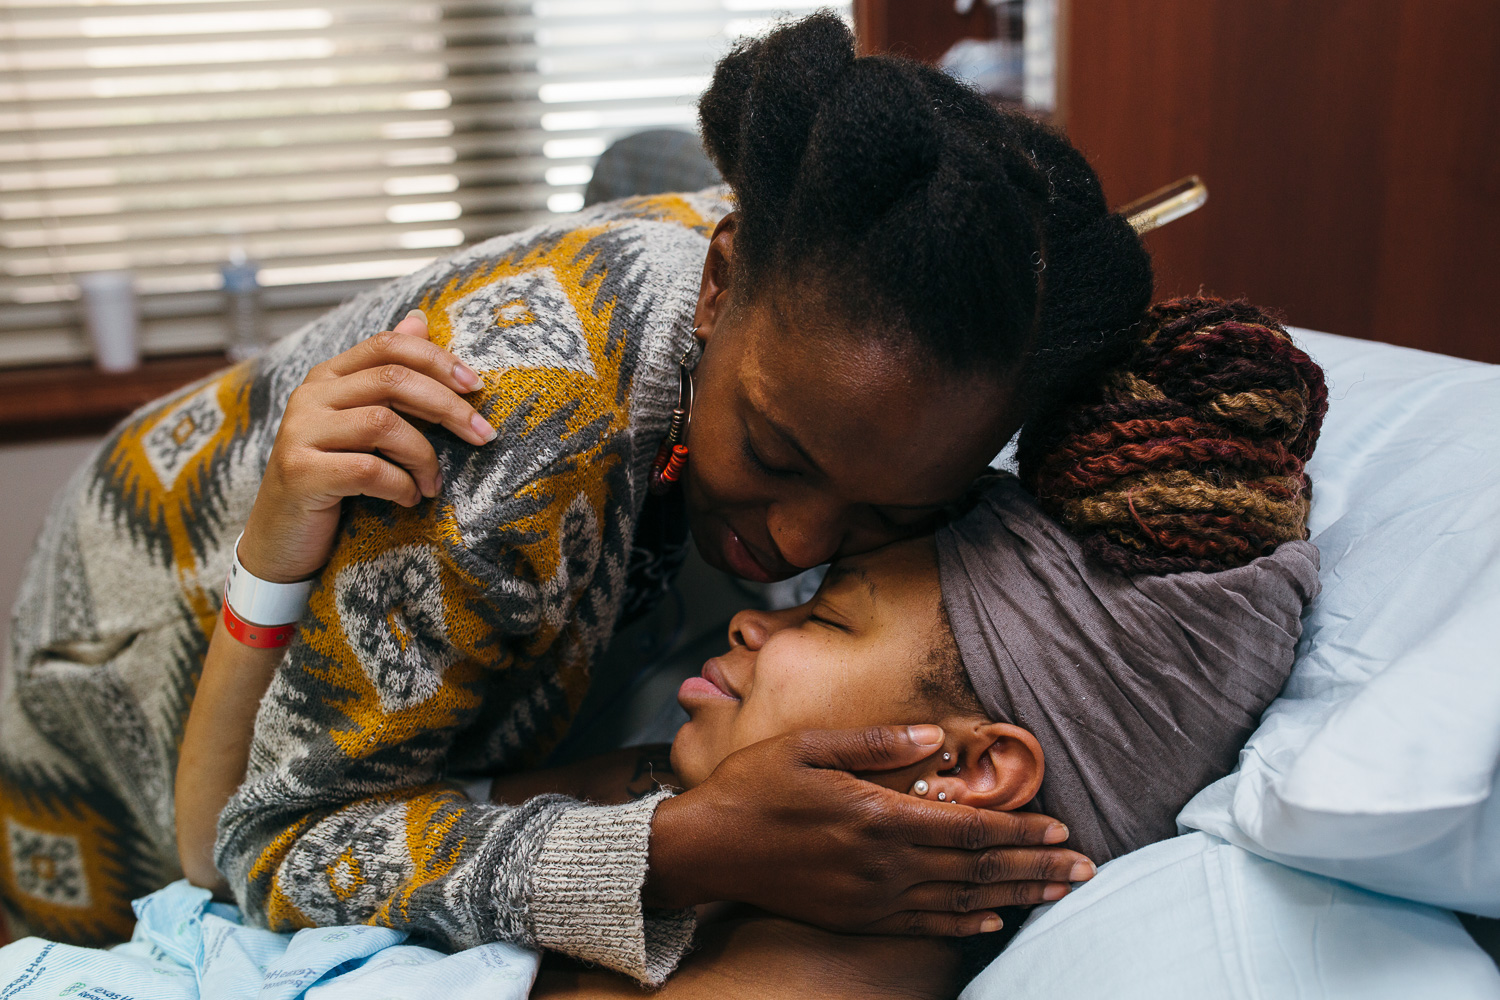 My sister's keeper supporting mother in labor